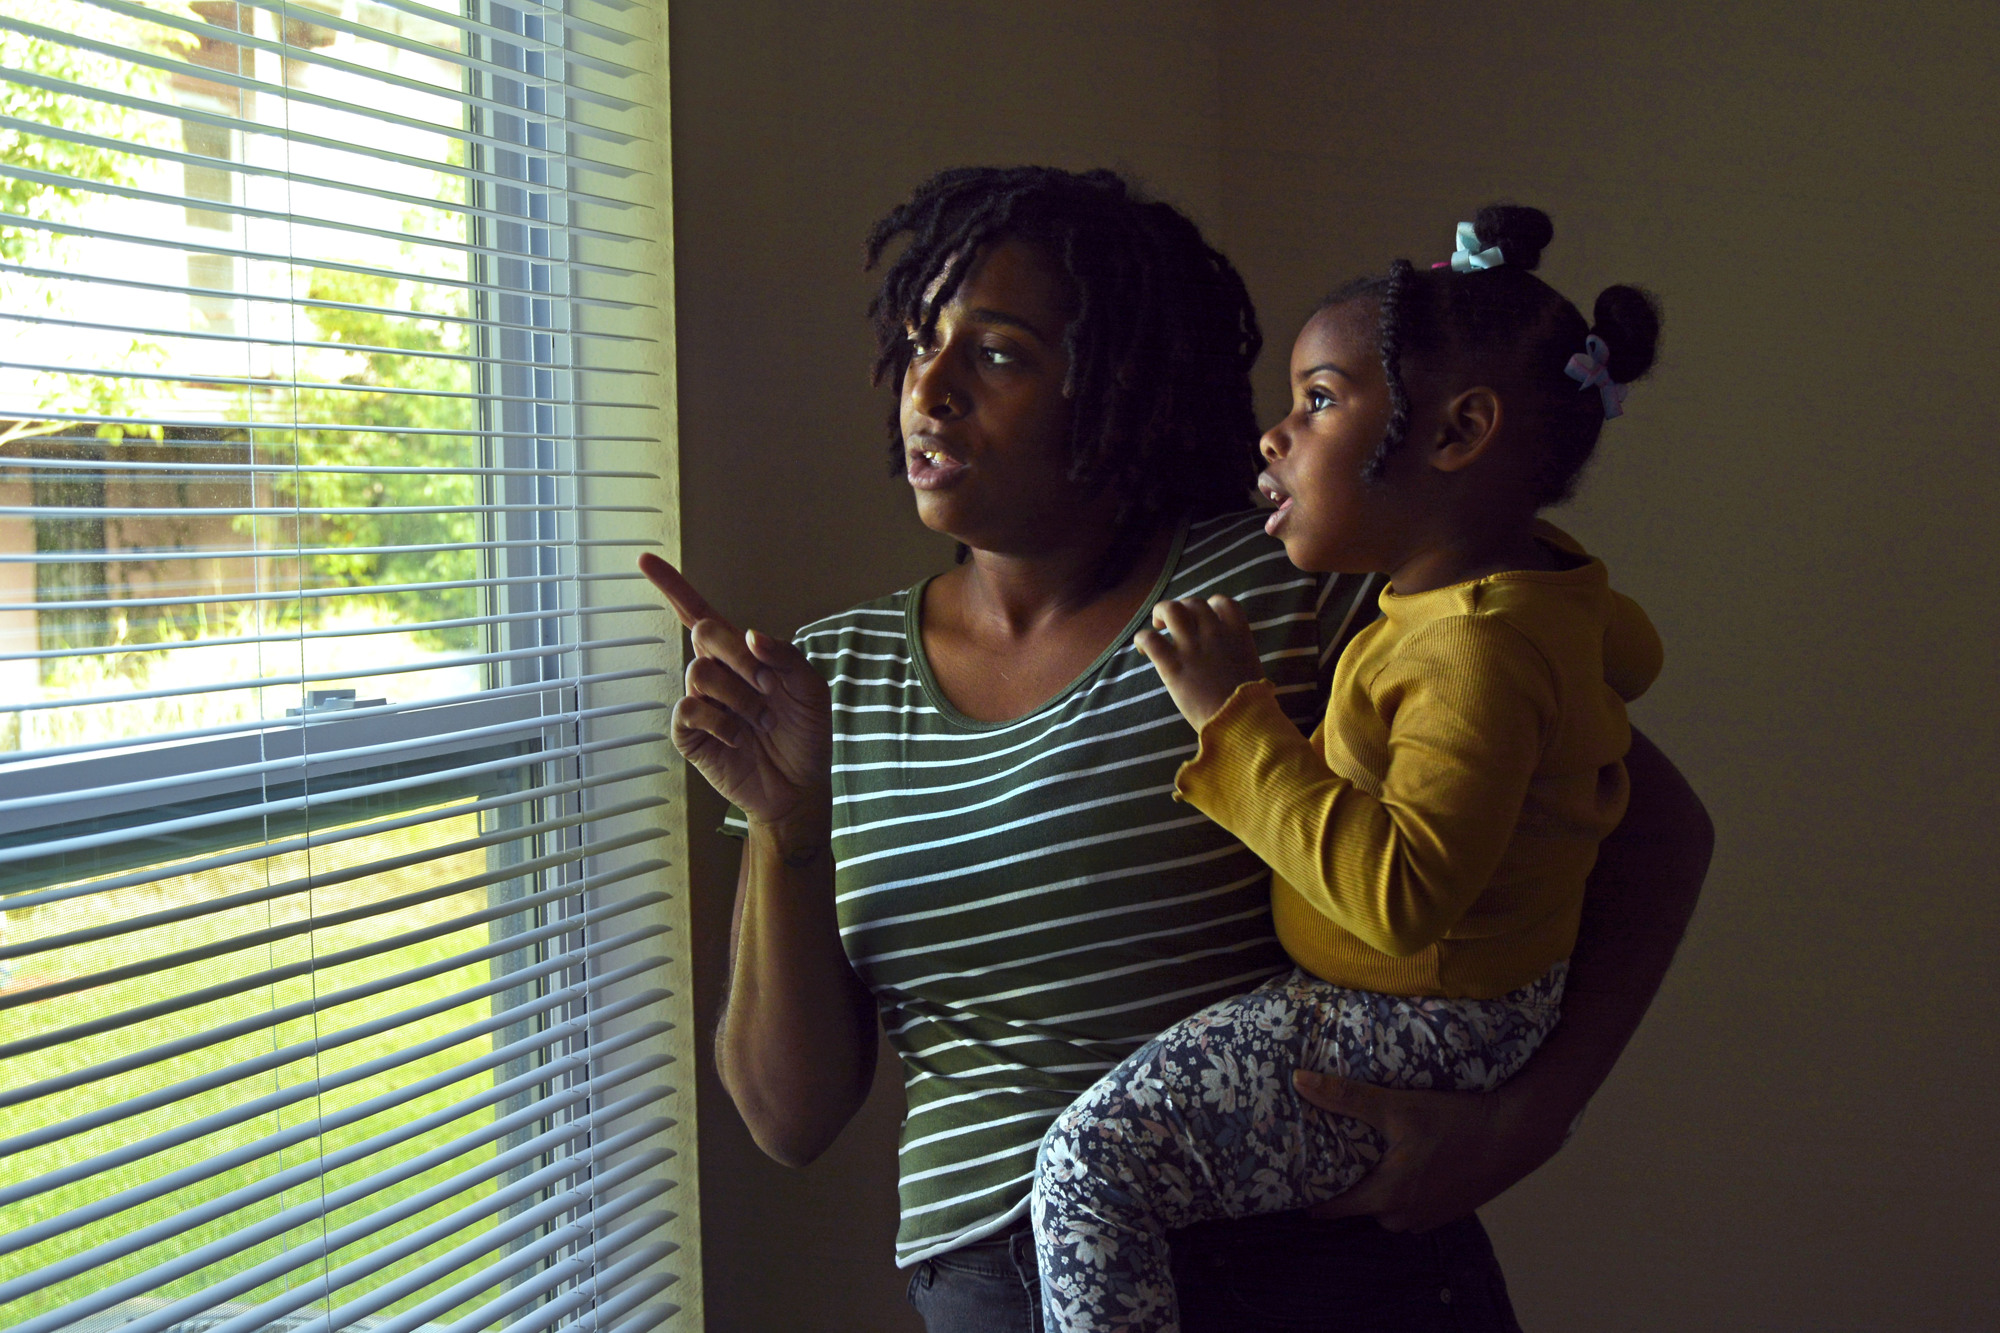 Natalie Kinscy and her daughter, Amiyah, face a brighter future as they settle into their new Habitat for Humanity home.